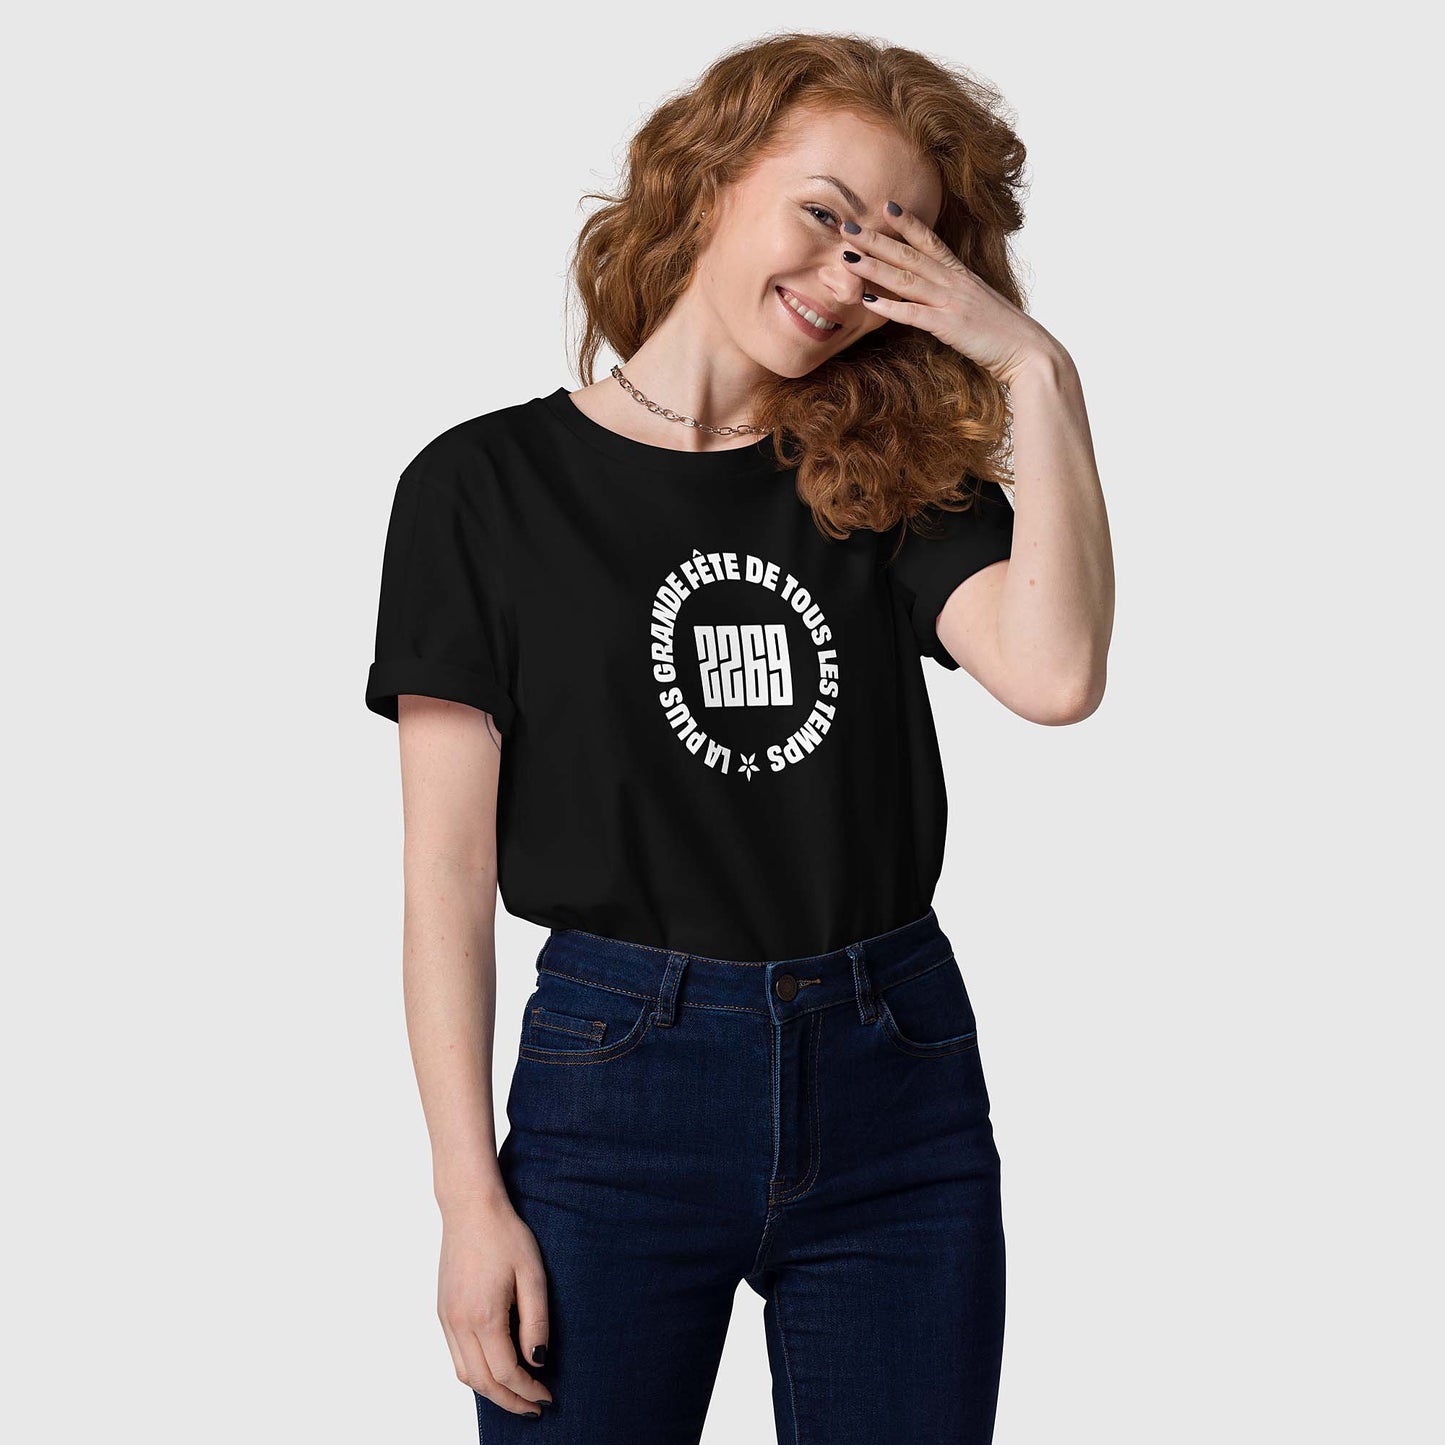 Unisex black organic cotton t-shirt with French 2269 party circle